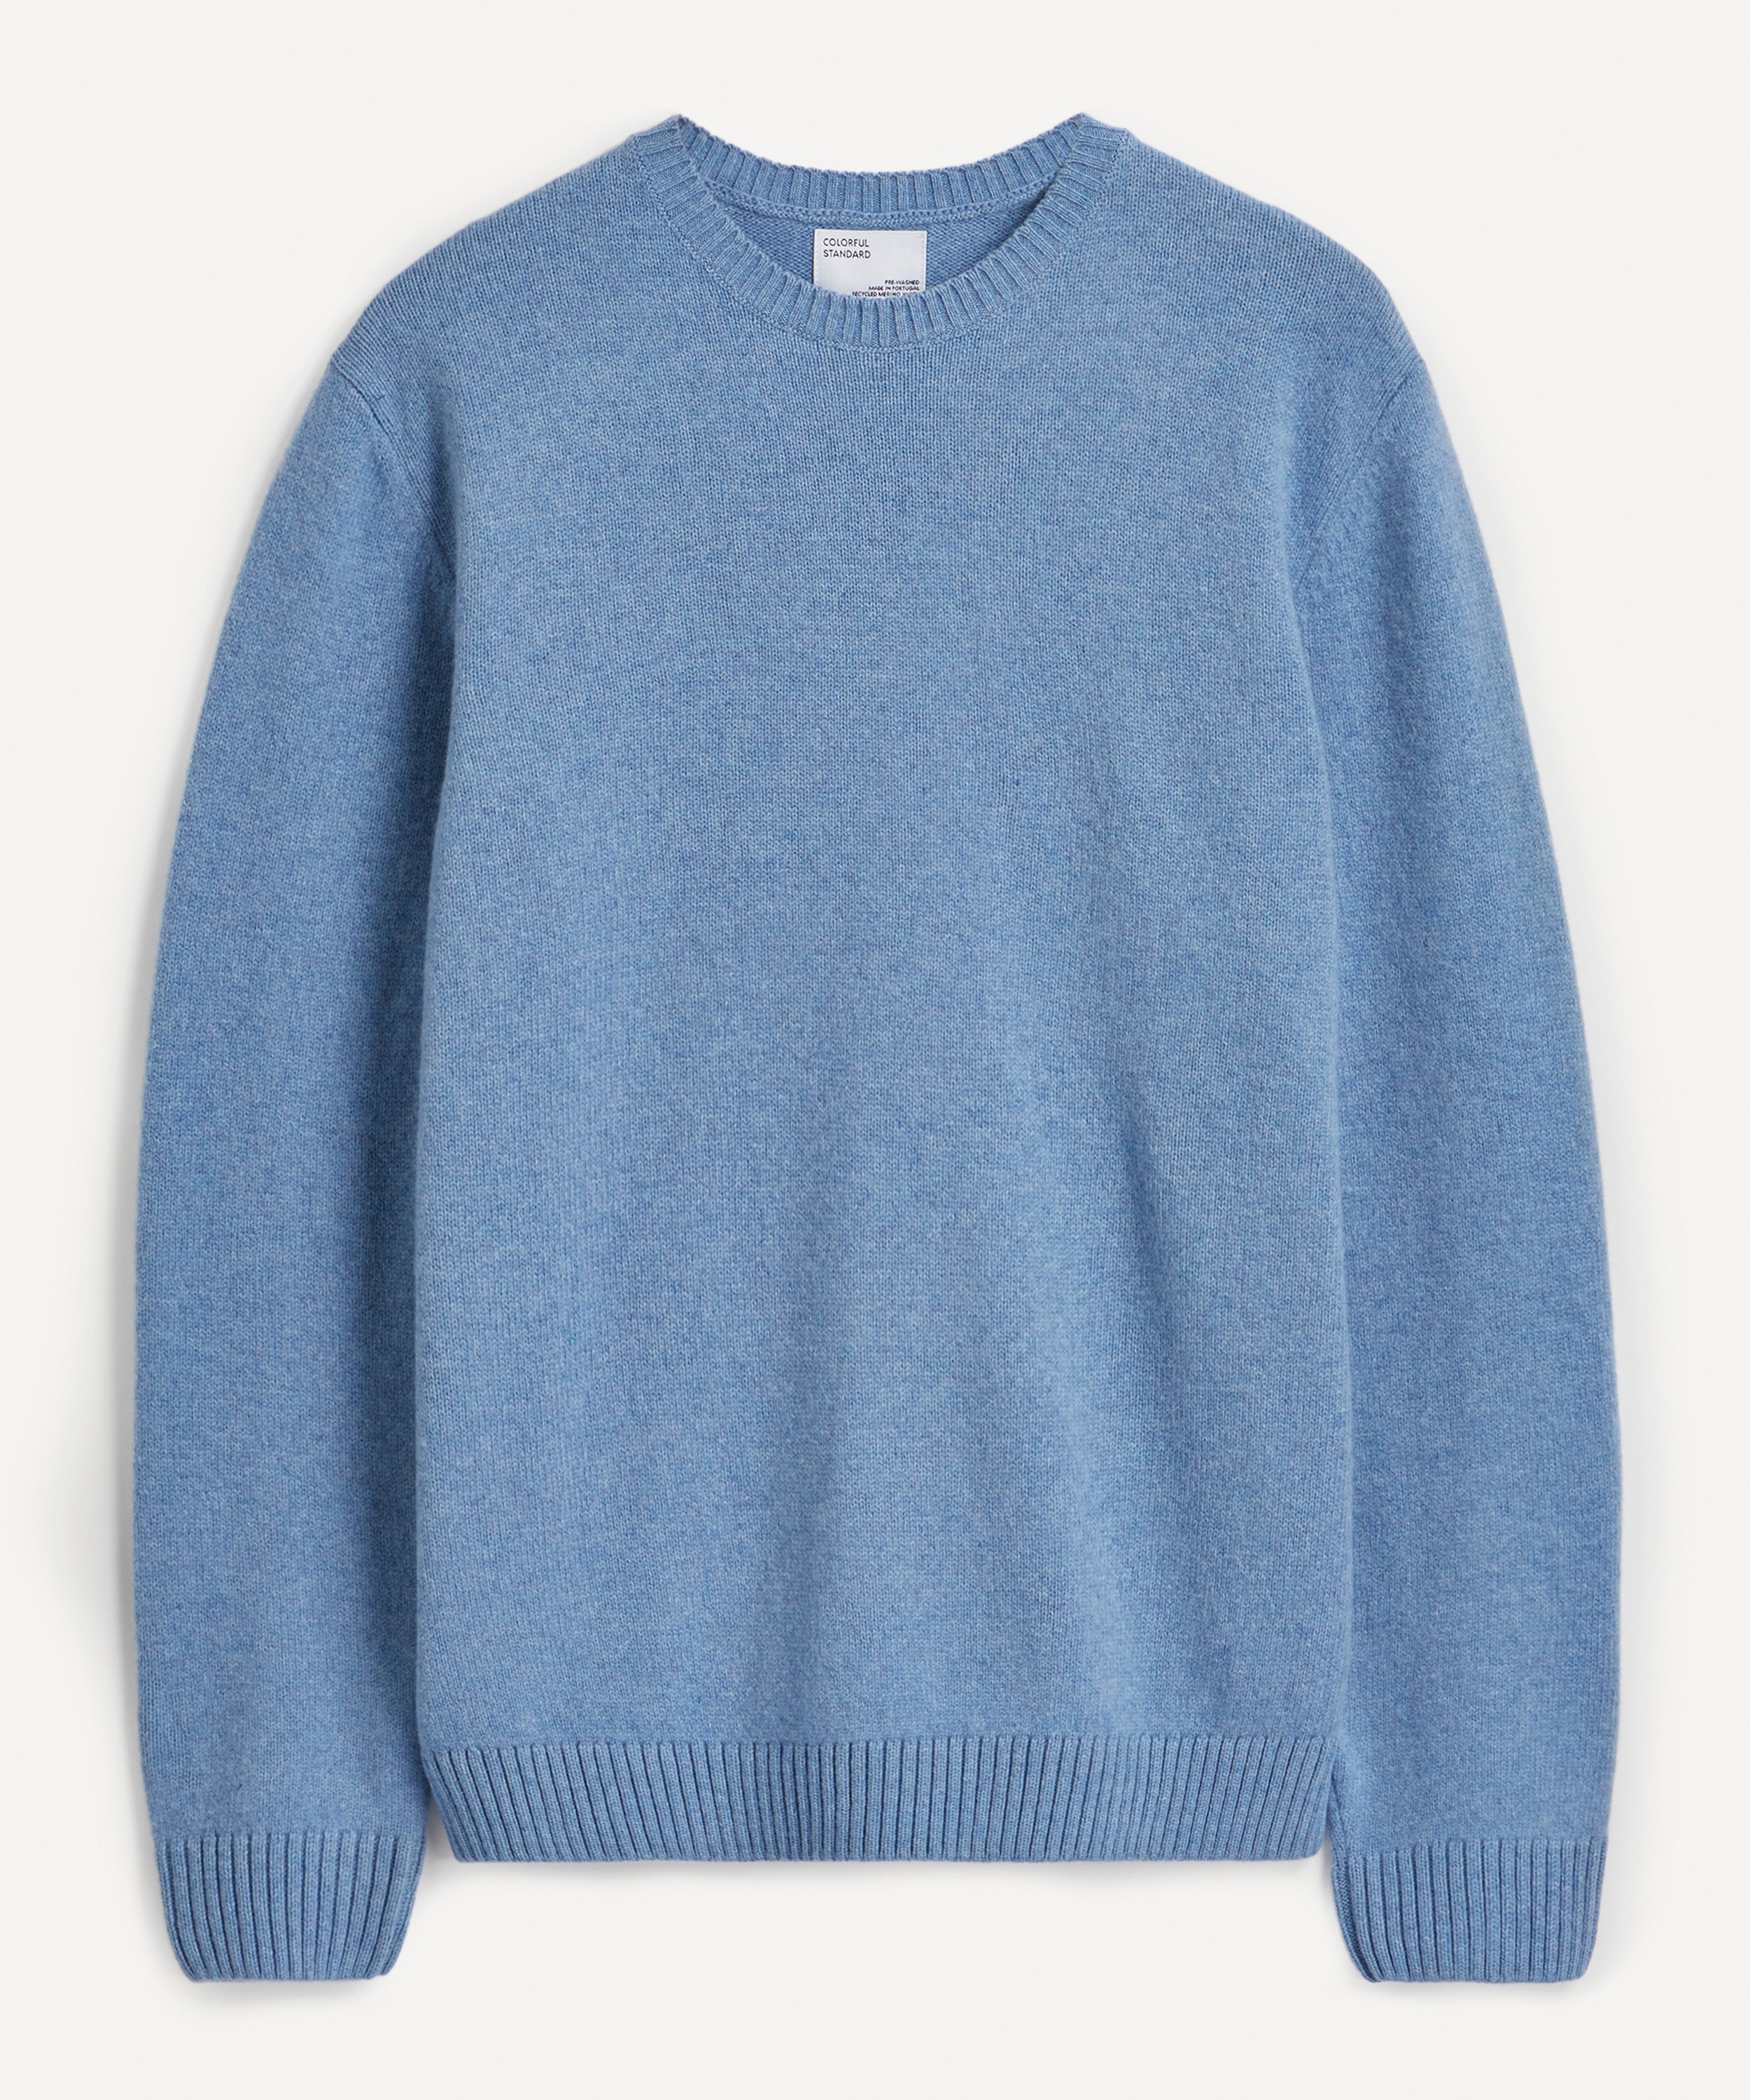 Colorful Standard - Classic Merino Wool Crew-Neck Jumper image number null